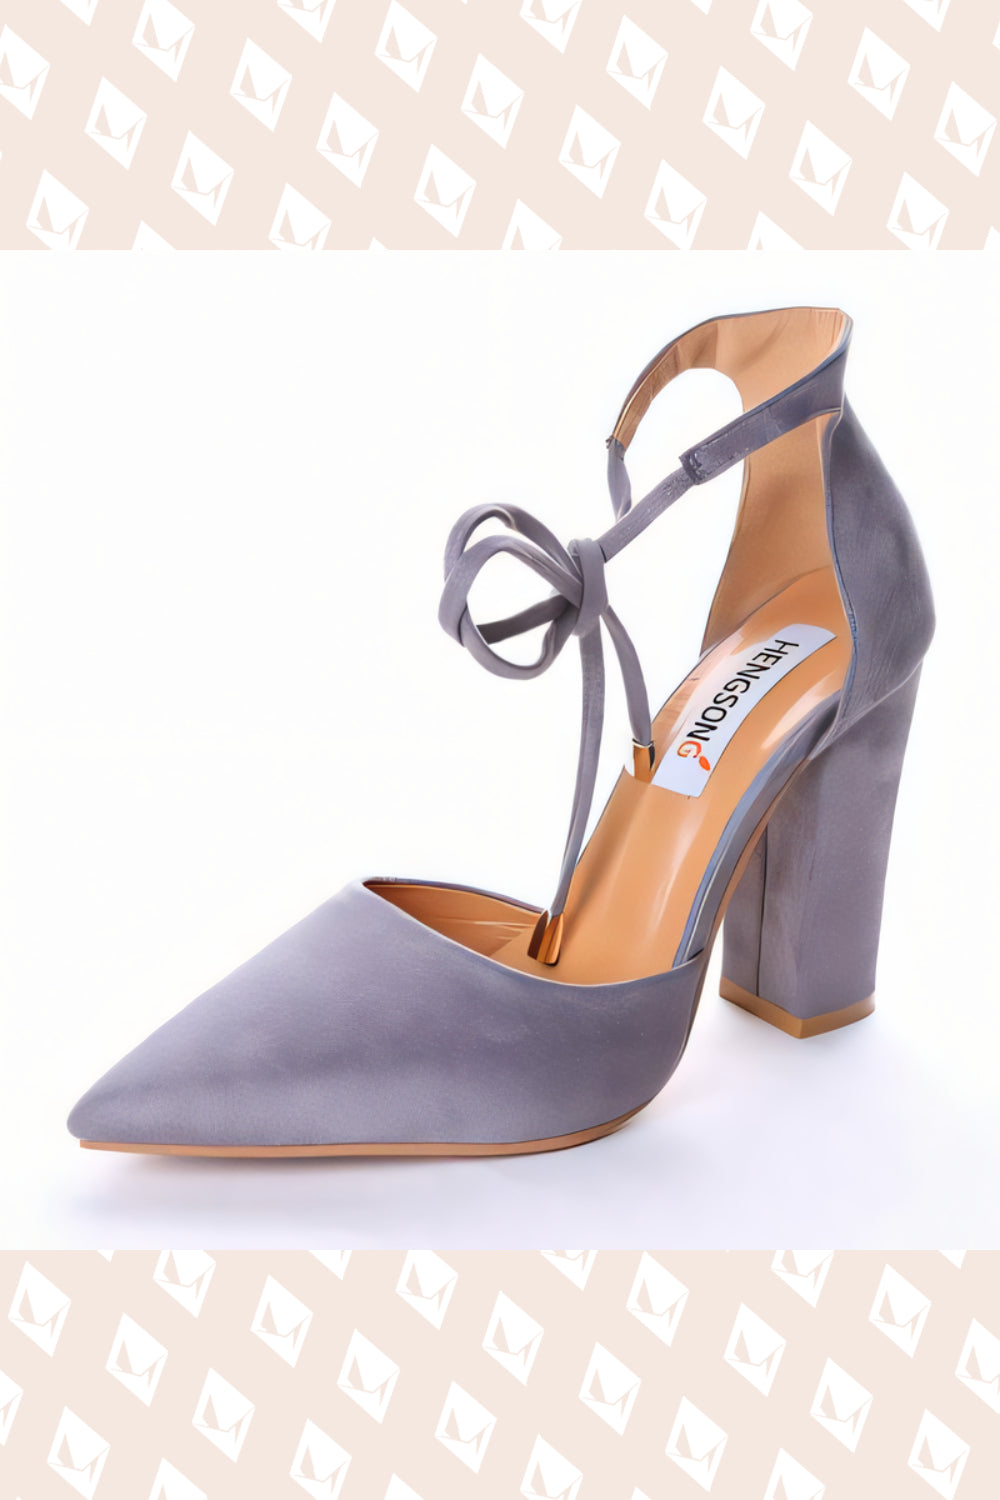 Simply Refined Heels - Gray - Strange Clothes